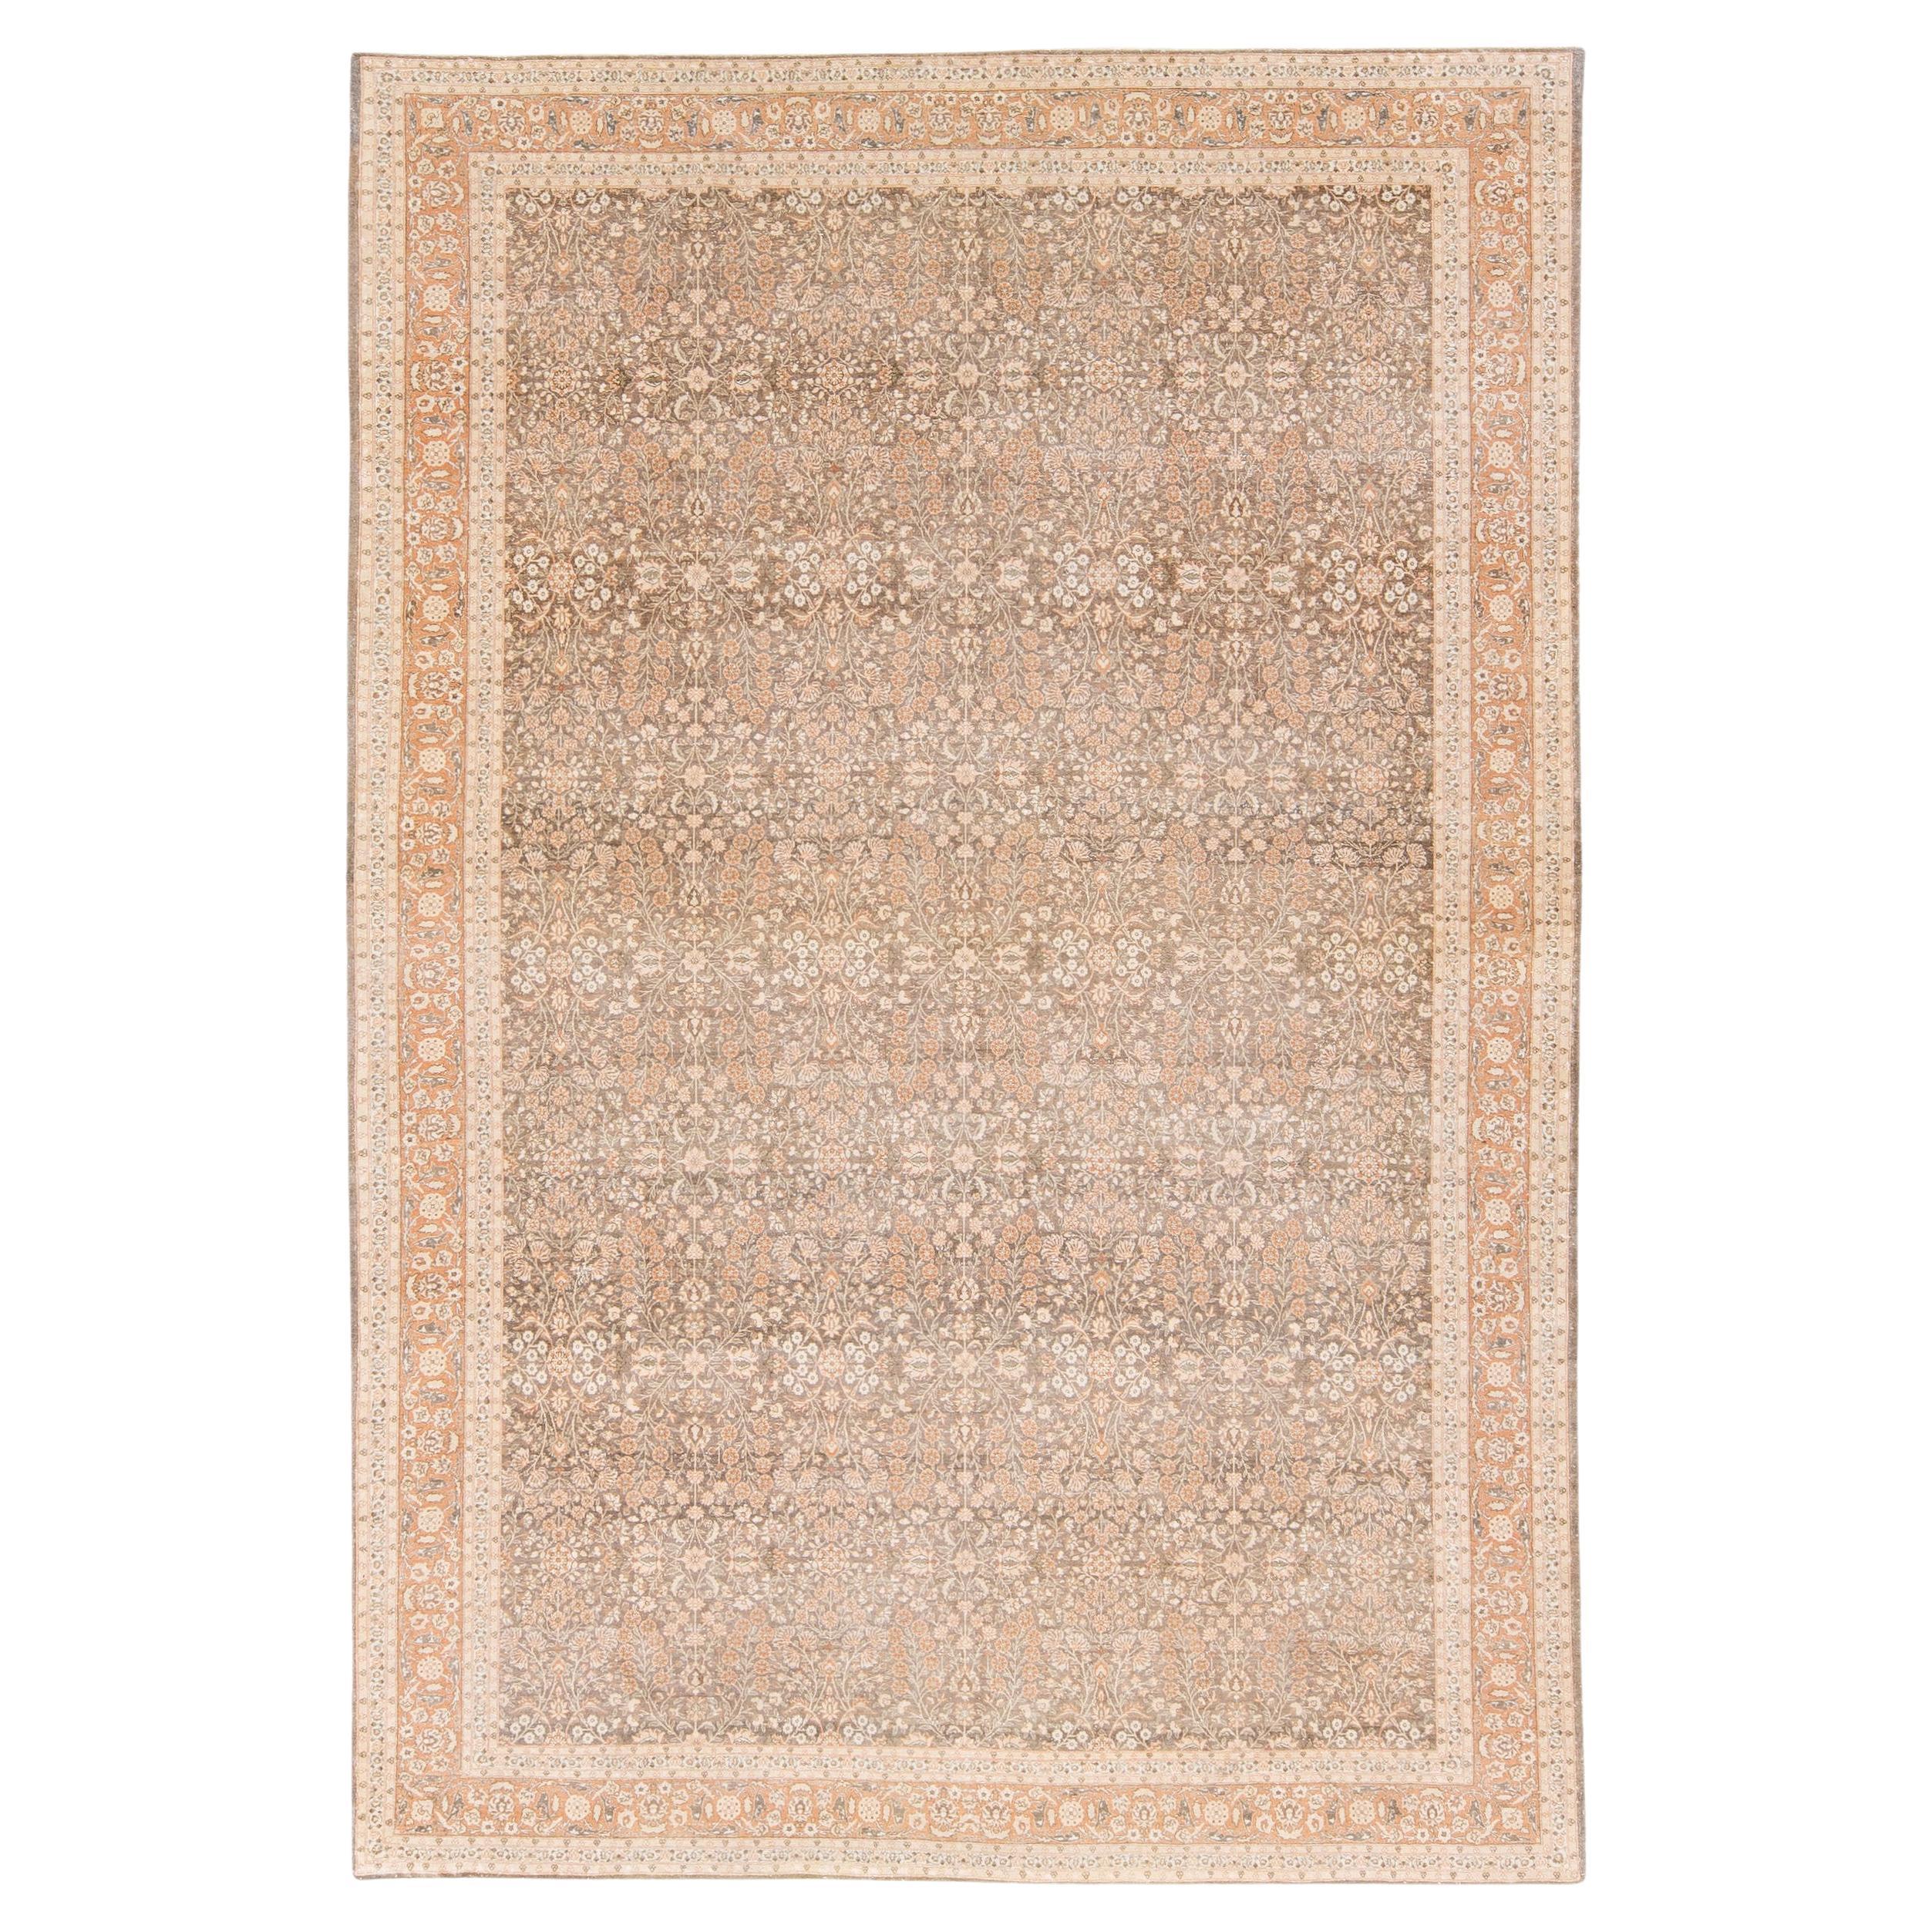 Antique Sivas Handmade Brown and Peach Floral Motif Wool Rug For Sale